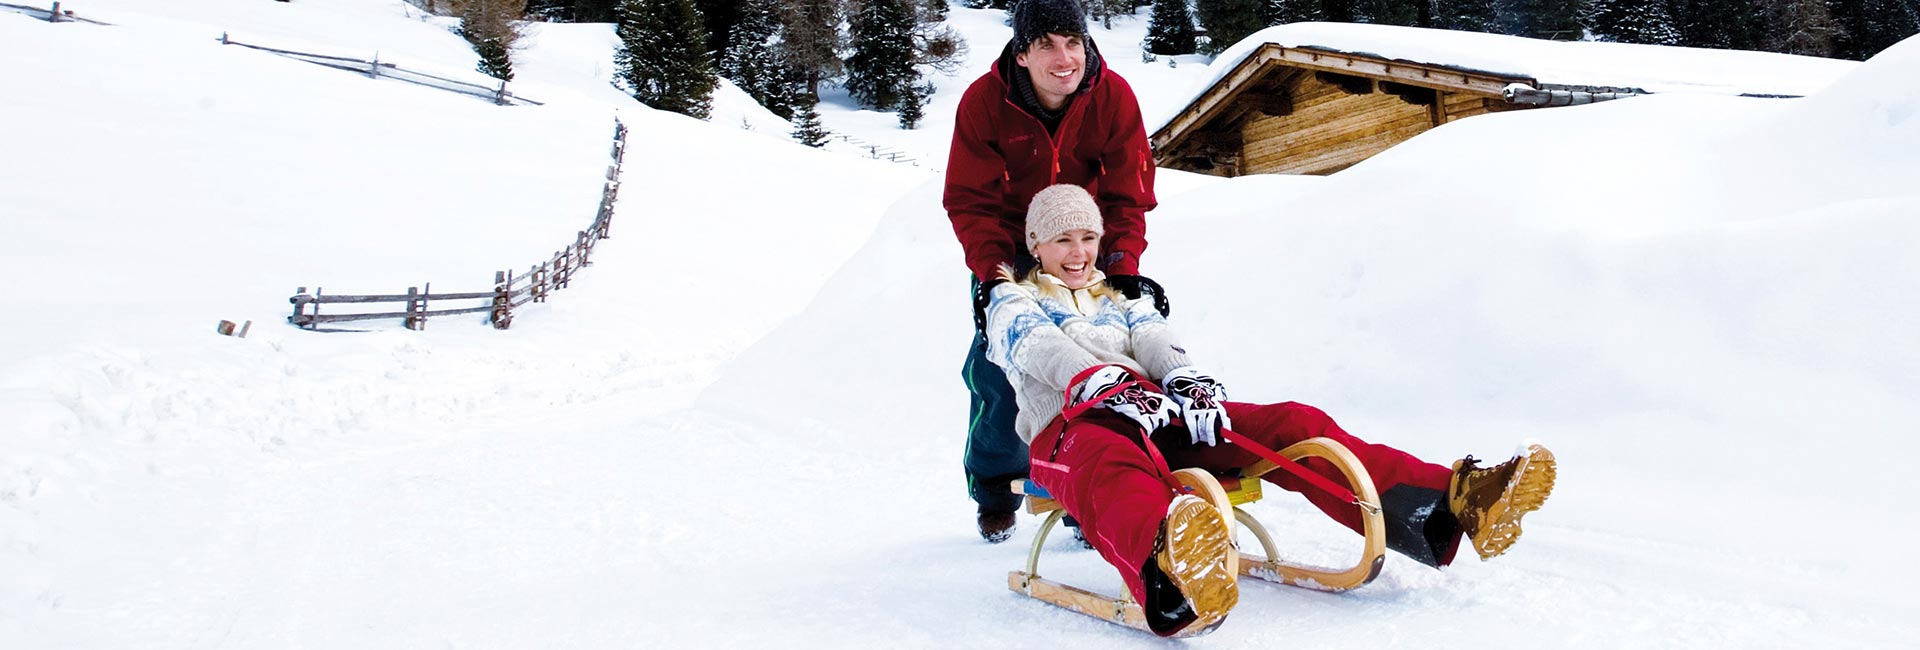 Toboggan Runs promise Fun for all Ages